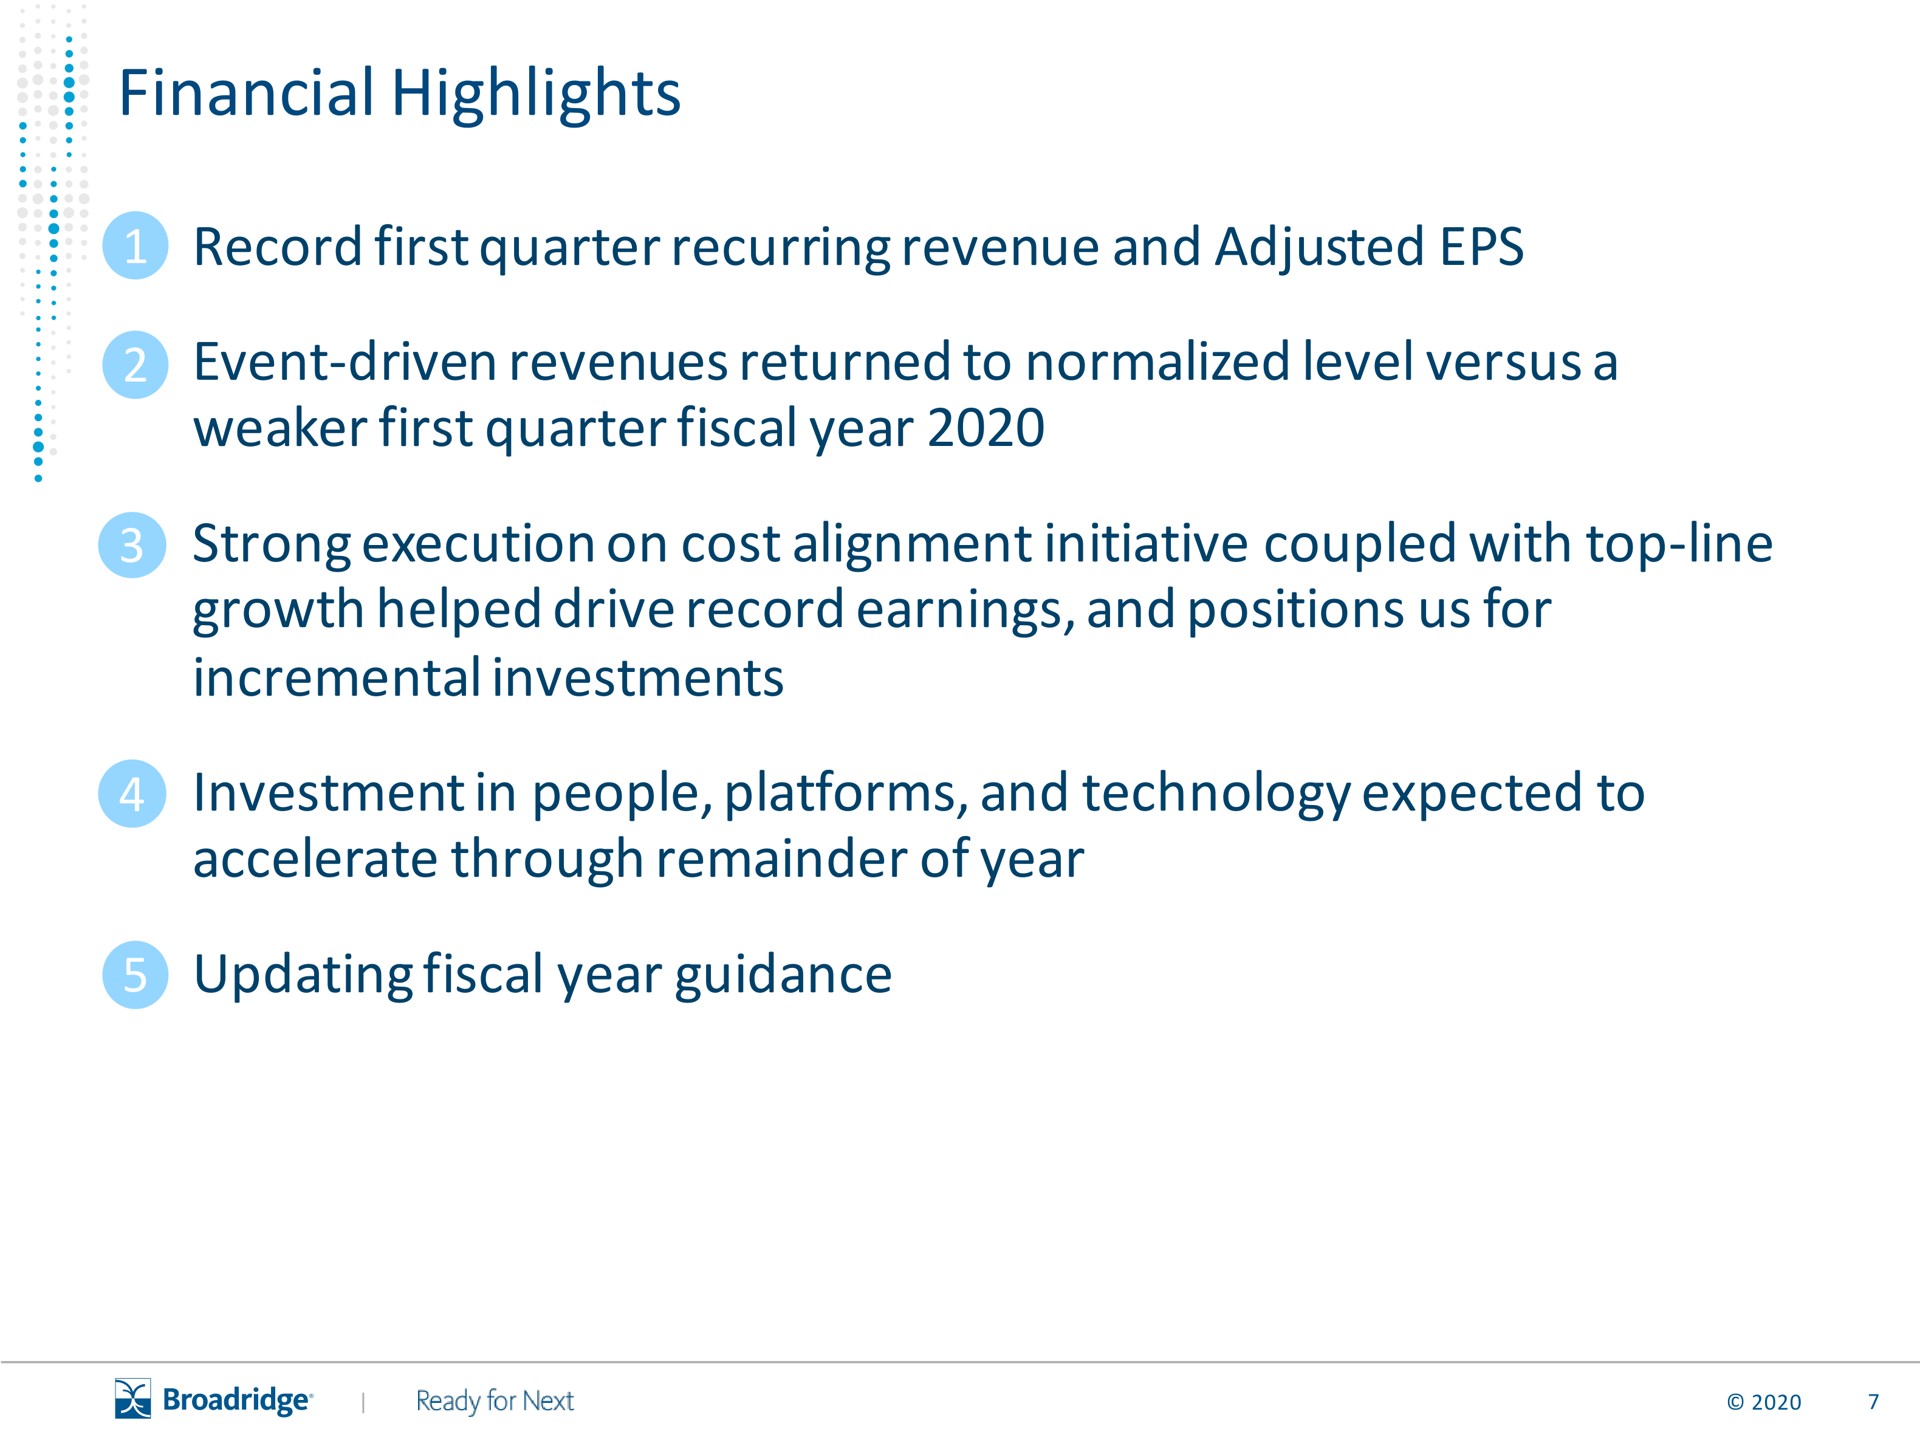 financial highlights record first quarter recurring revenue and adjusted first quarter fiscal year strong execution on cost alignment initiative coupled with top line growth helped drive record earnings and positions us for incremental investments people platforms and technology expected to accelerate through remainder of year updating fiscal year guidance | Broadridge Financial Solutions